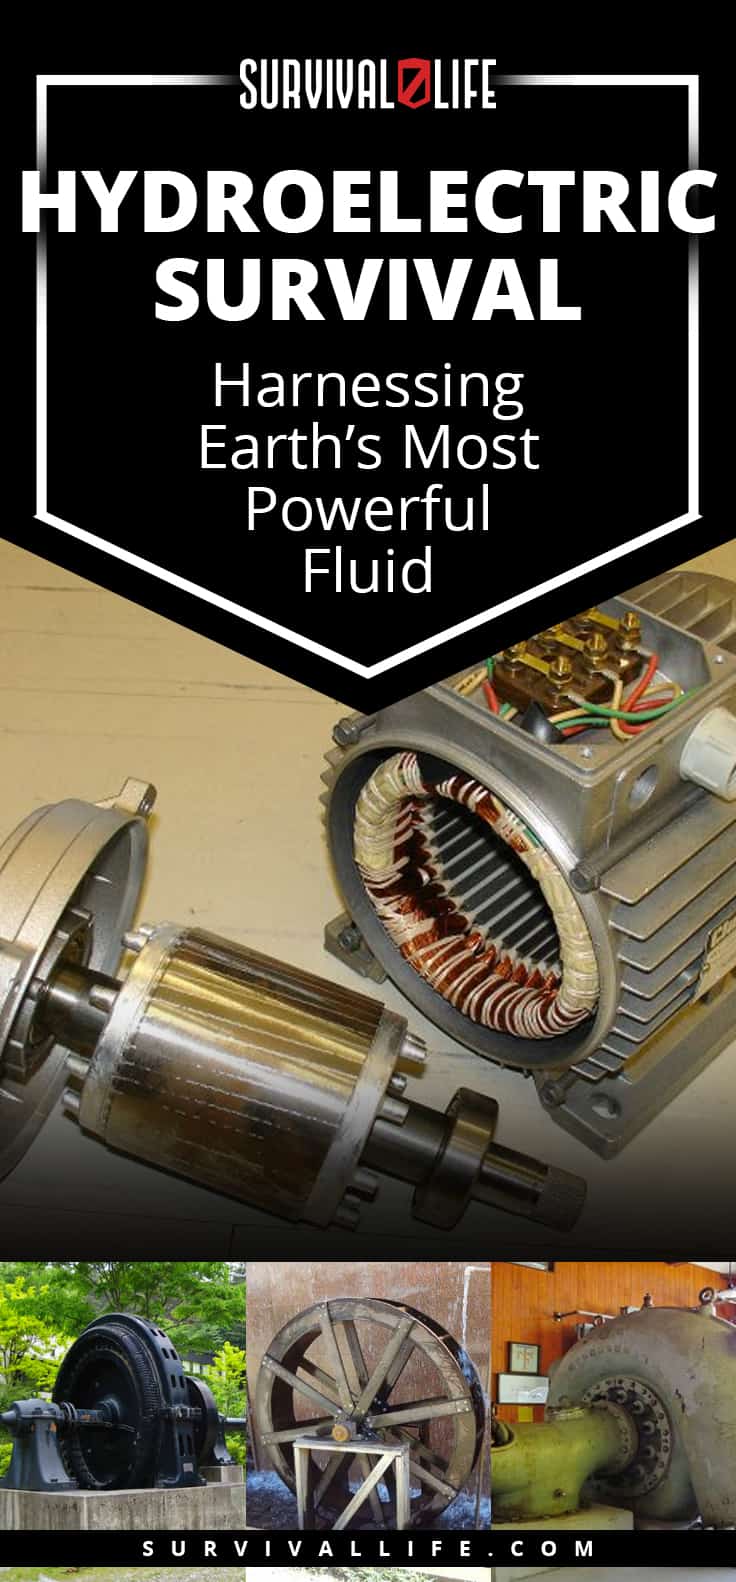 Hydroelectric Survival – Harnessing Earth’s Most Powerful Fluid